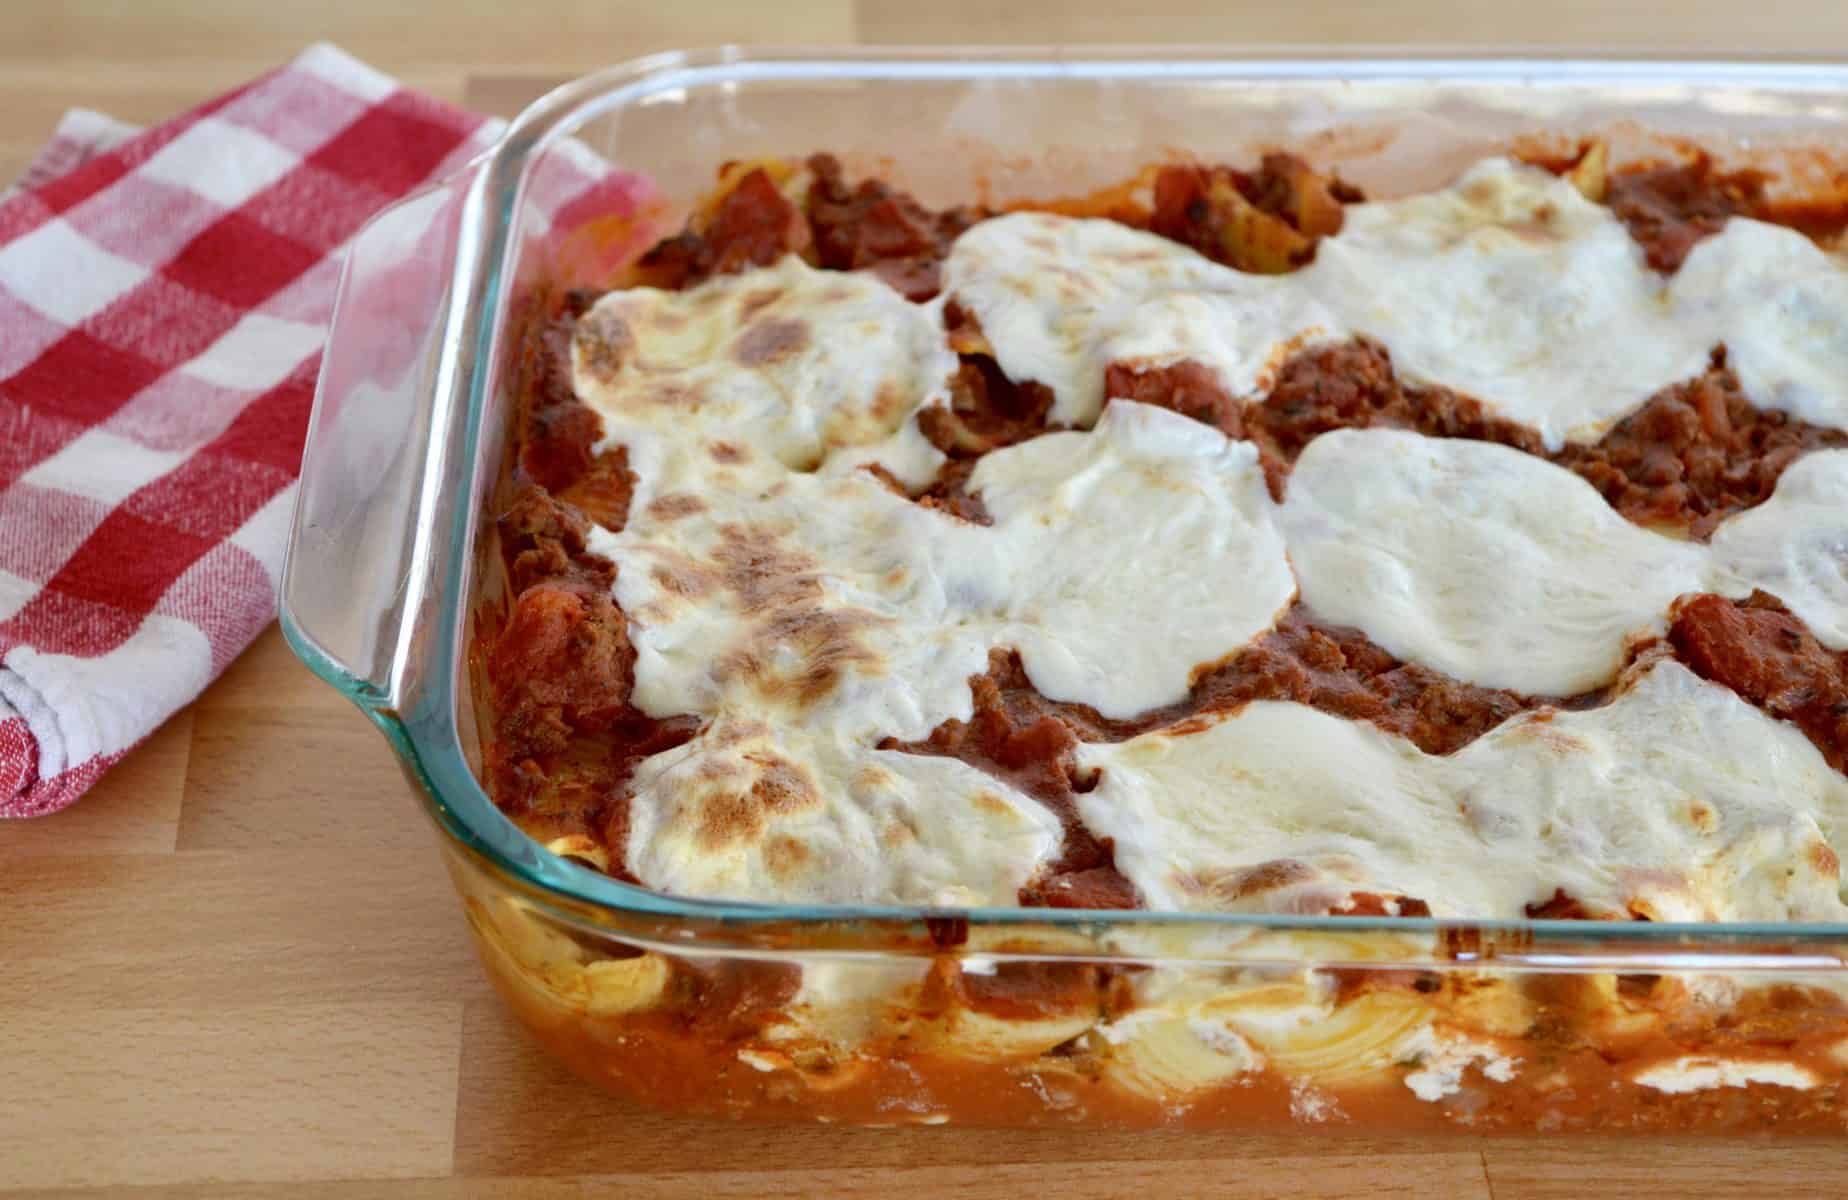 Cheese beef Stuffed Shells in a glass baking dish.